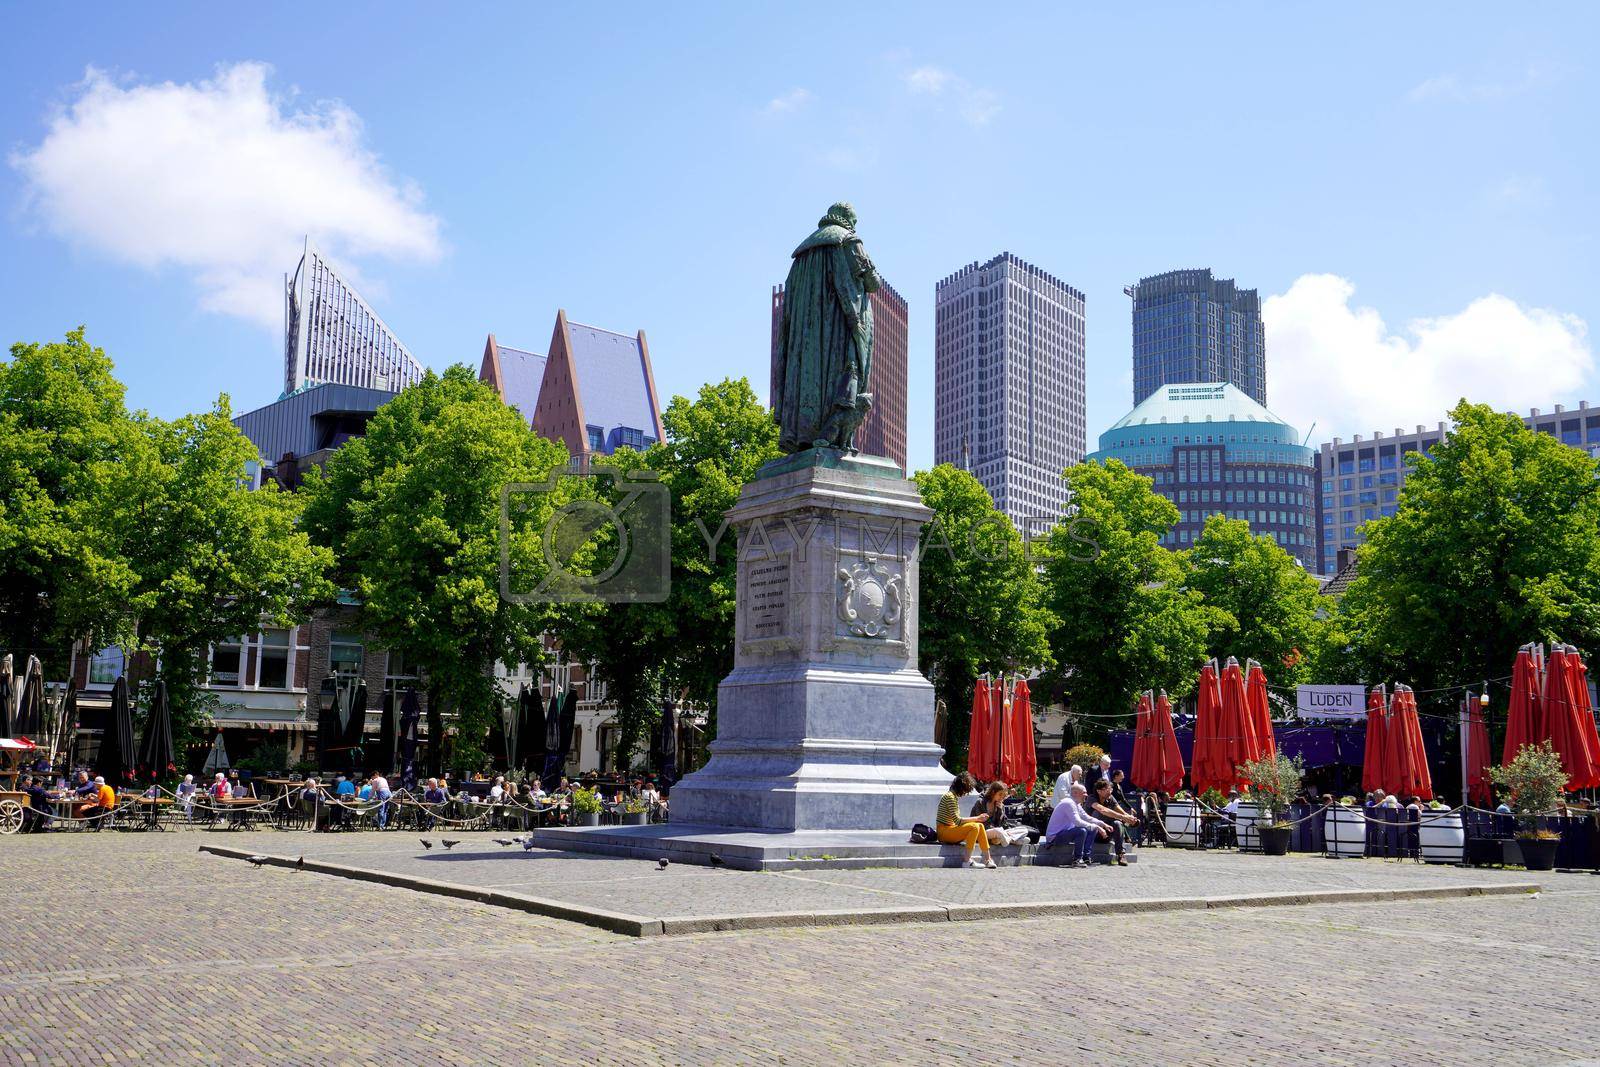 THE HAGUE, NETHERLANDS - JUNE 9, 2022: Het Plein is a town square in the old city centre of The Hague in the Netherlands